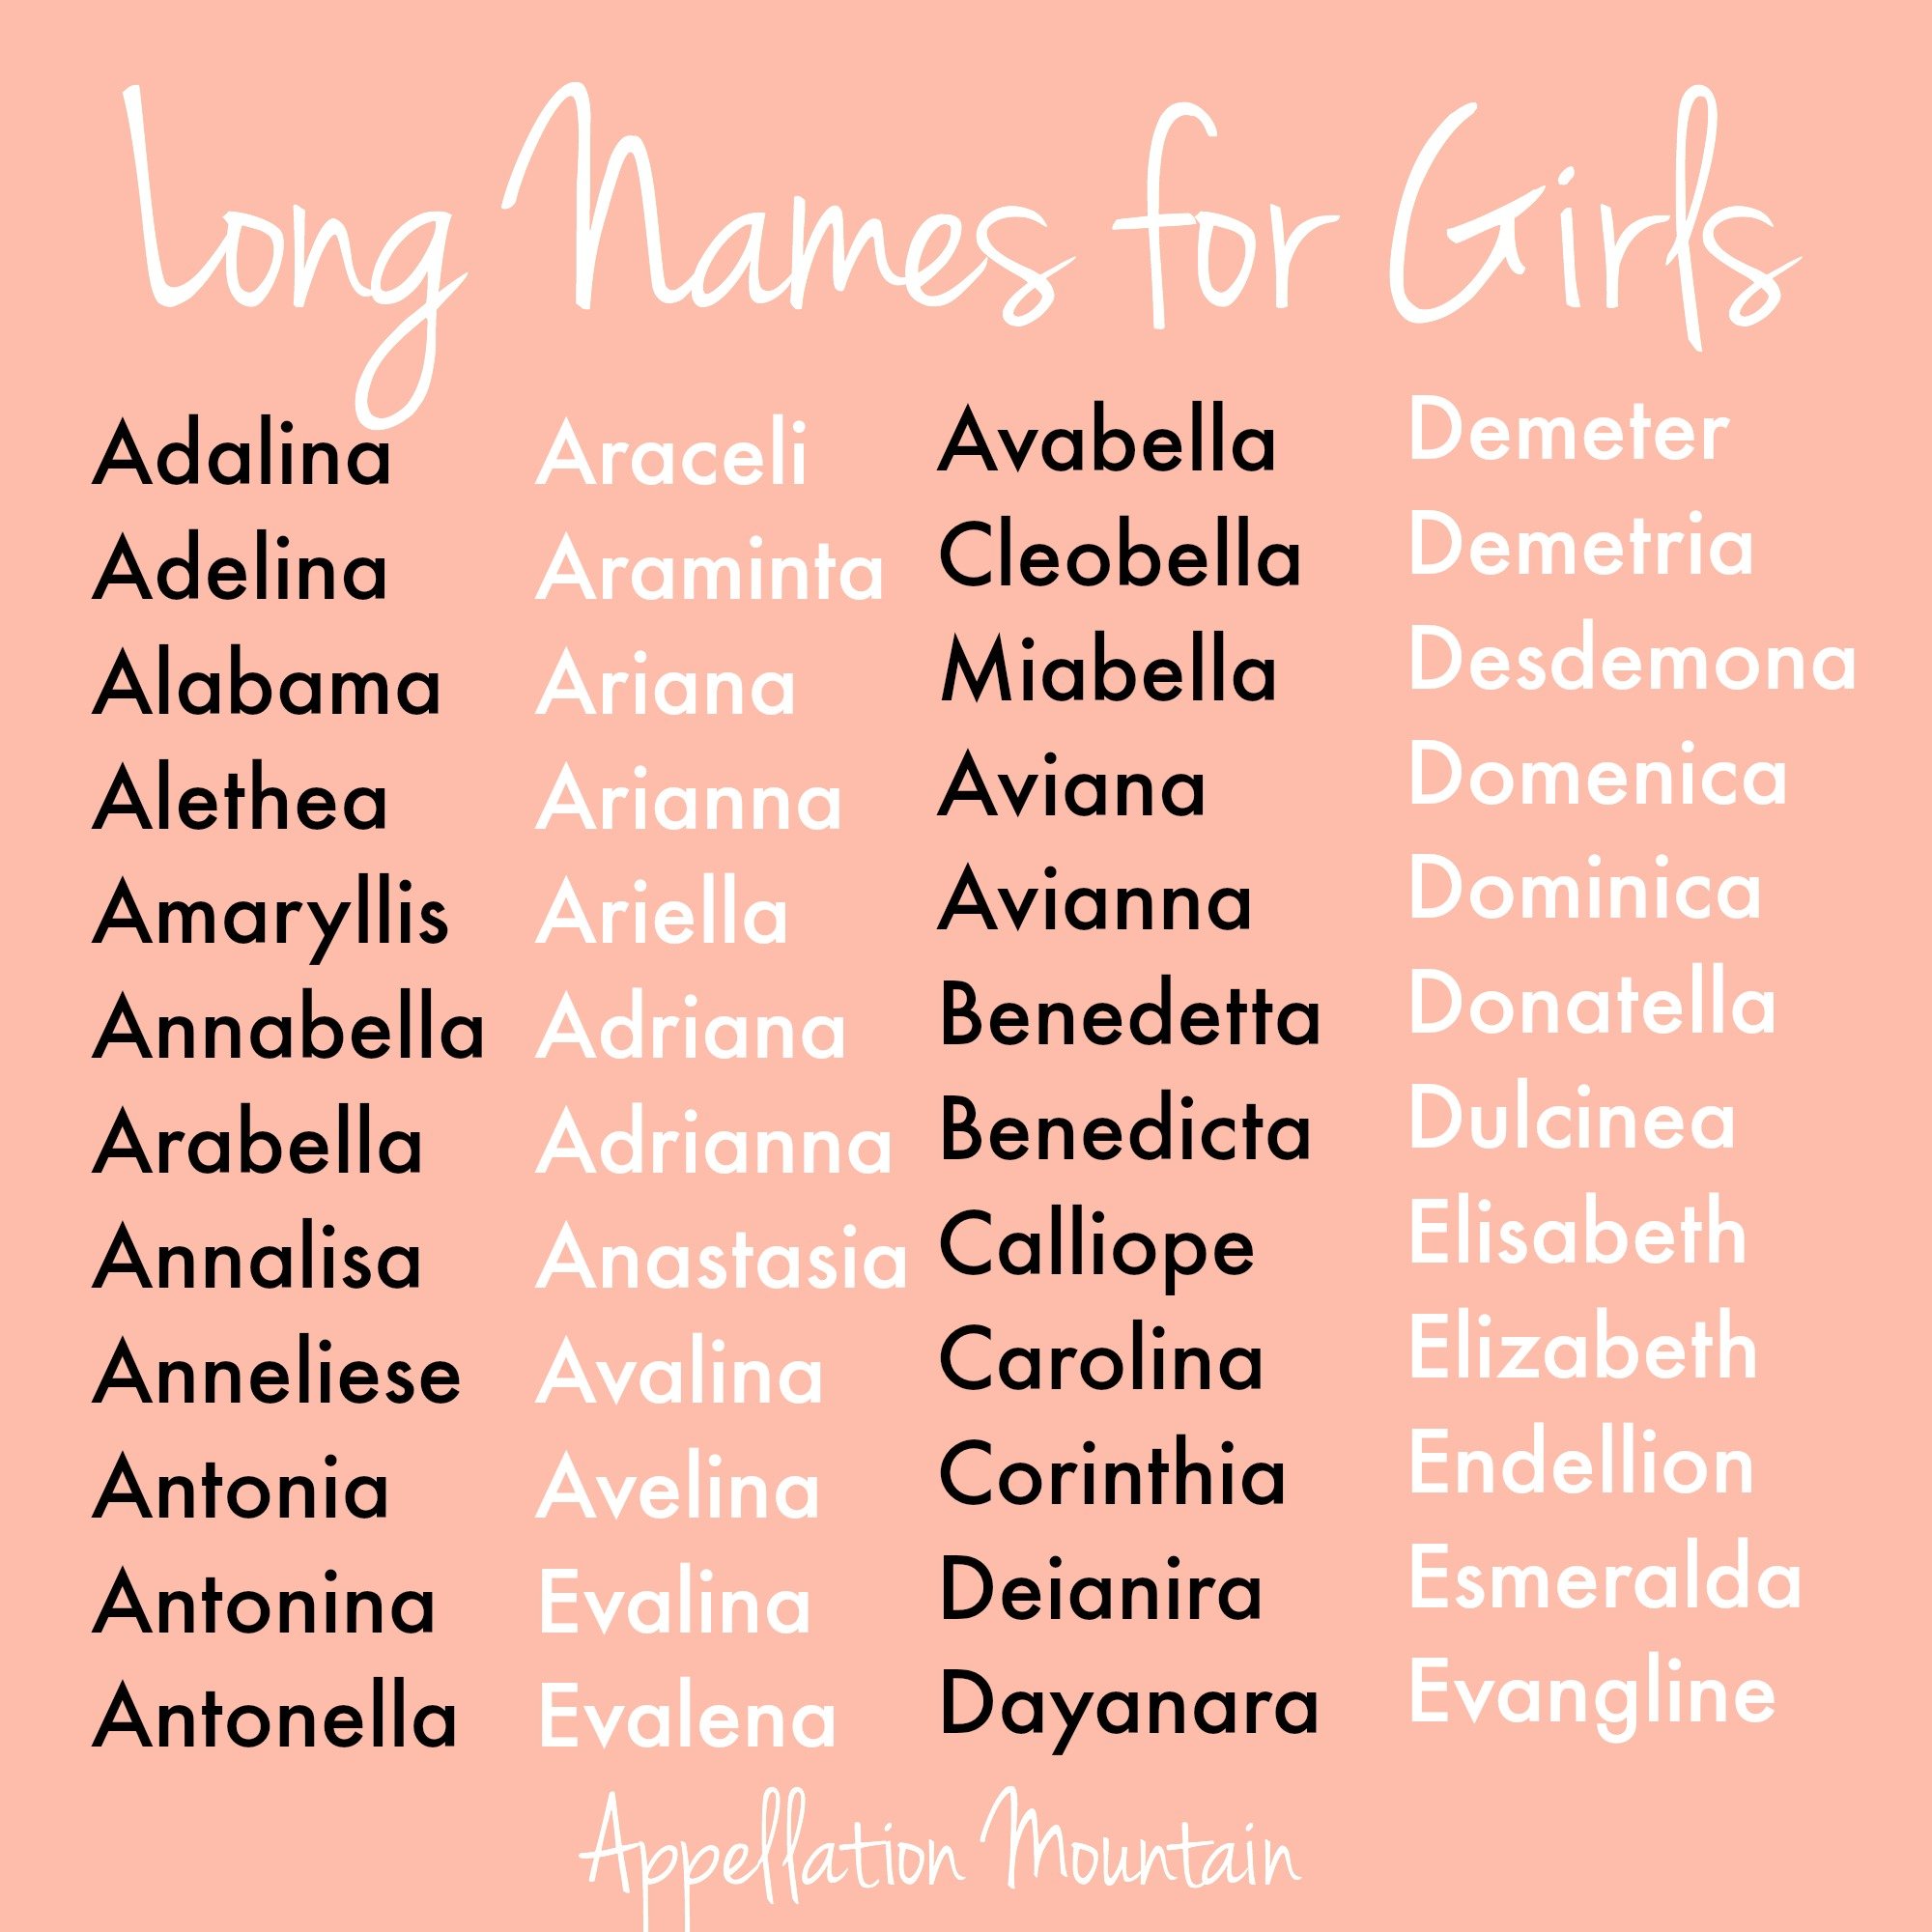 Long Names for Girls: Elizabella and Anneliese - Appellation Mountain